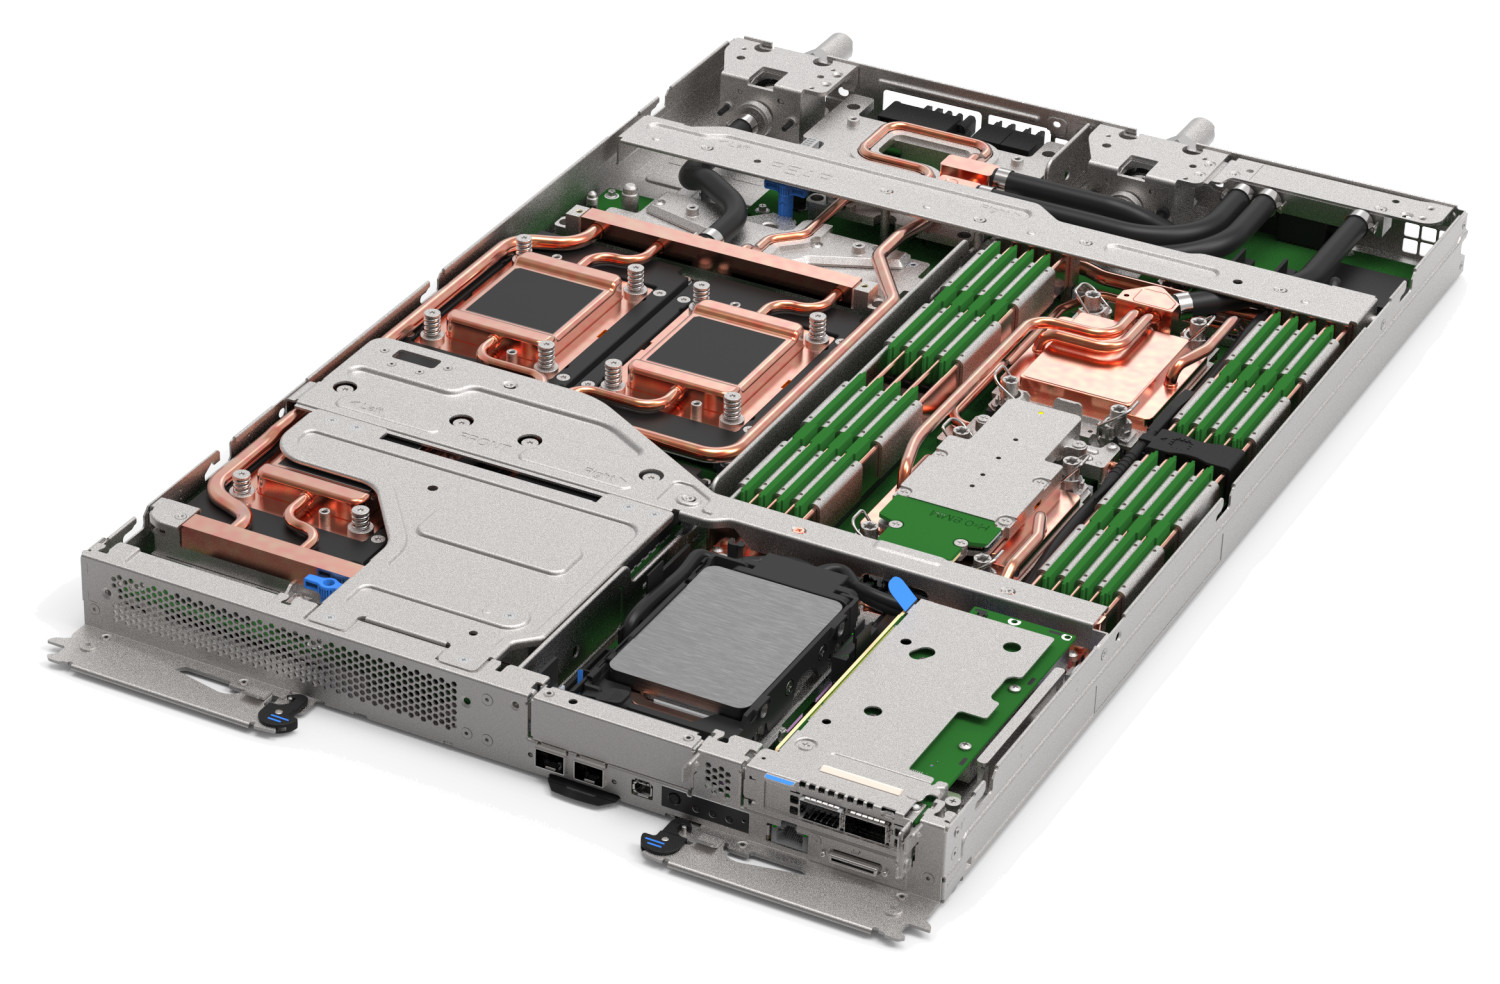 The Lenovo ThinkSystem SD650-I V3 server tray with two processors and four GPUs